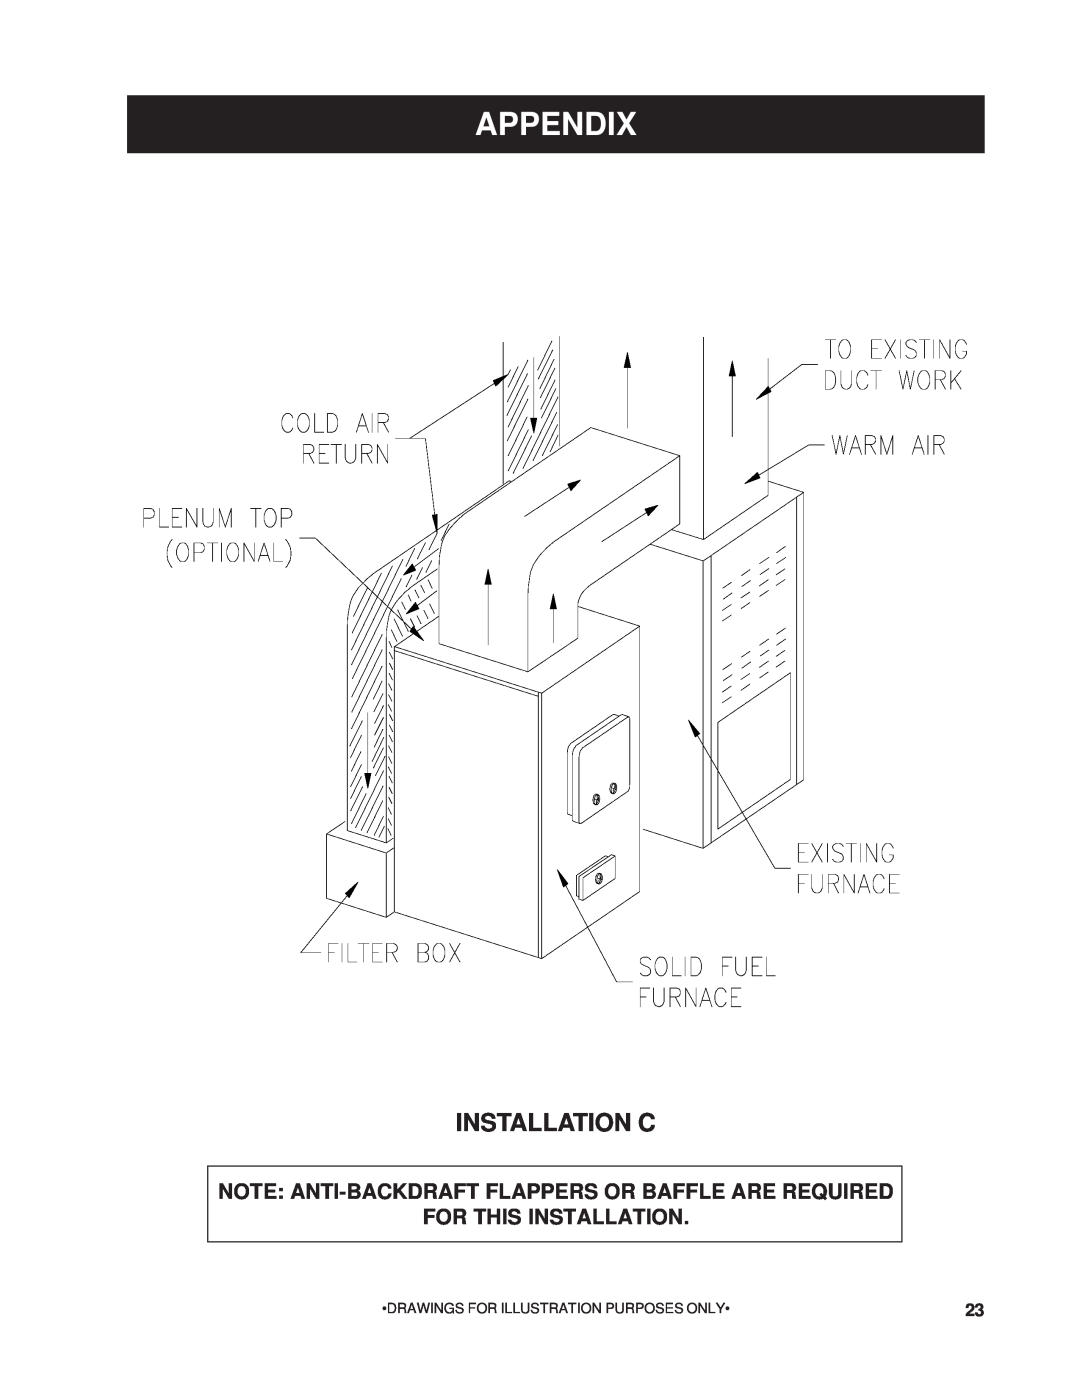 United States Stove 1200G Installation C, Appendix, For This Installation, Drawings For Illustration Purposes Only 